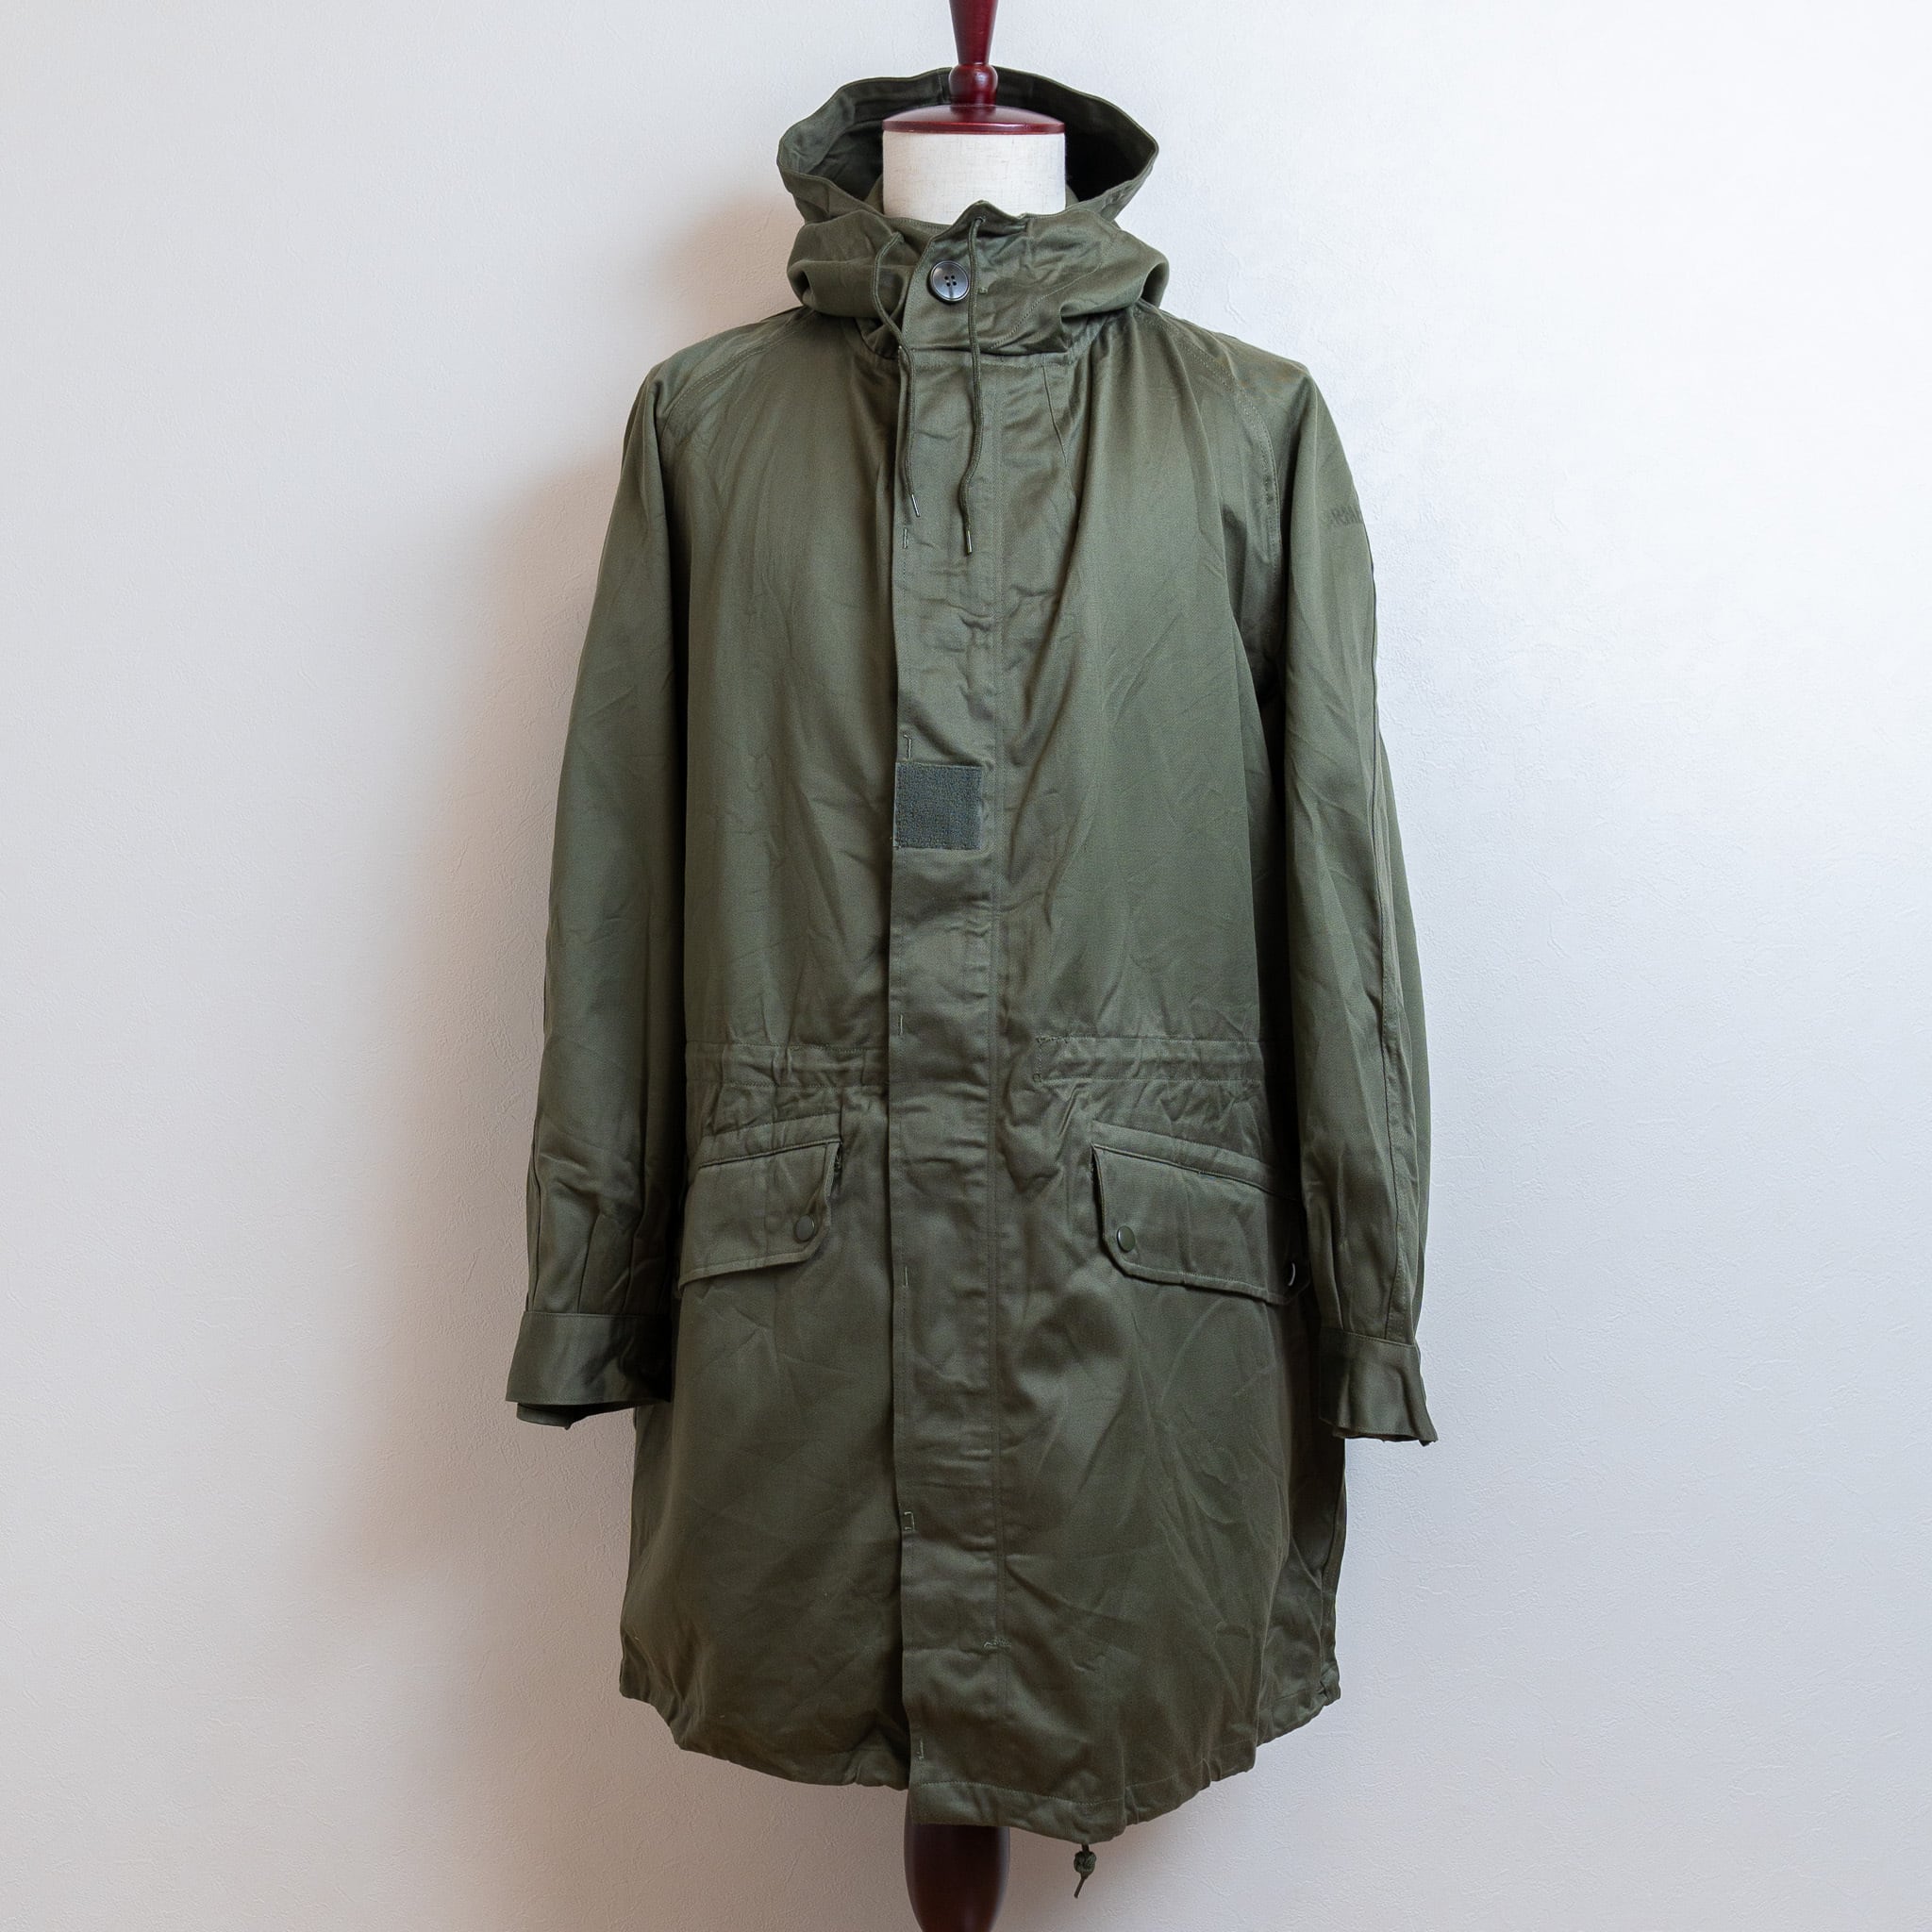 【DEADSTOCK】French Army M-64 Field Parka ＆ Boa Line 実物 フランス軍 フィールドパーカー  デッドストック | FAR EAST SIGNAL powered by BASE